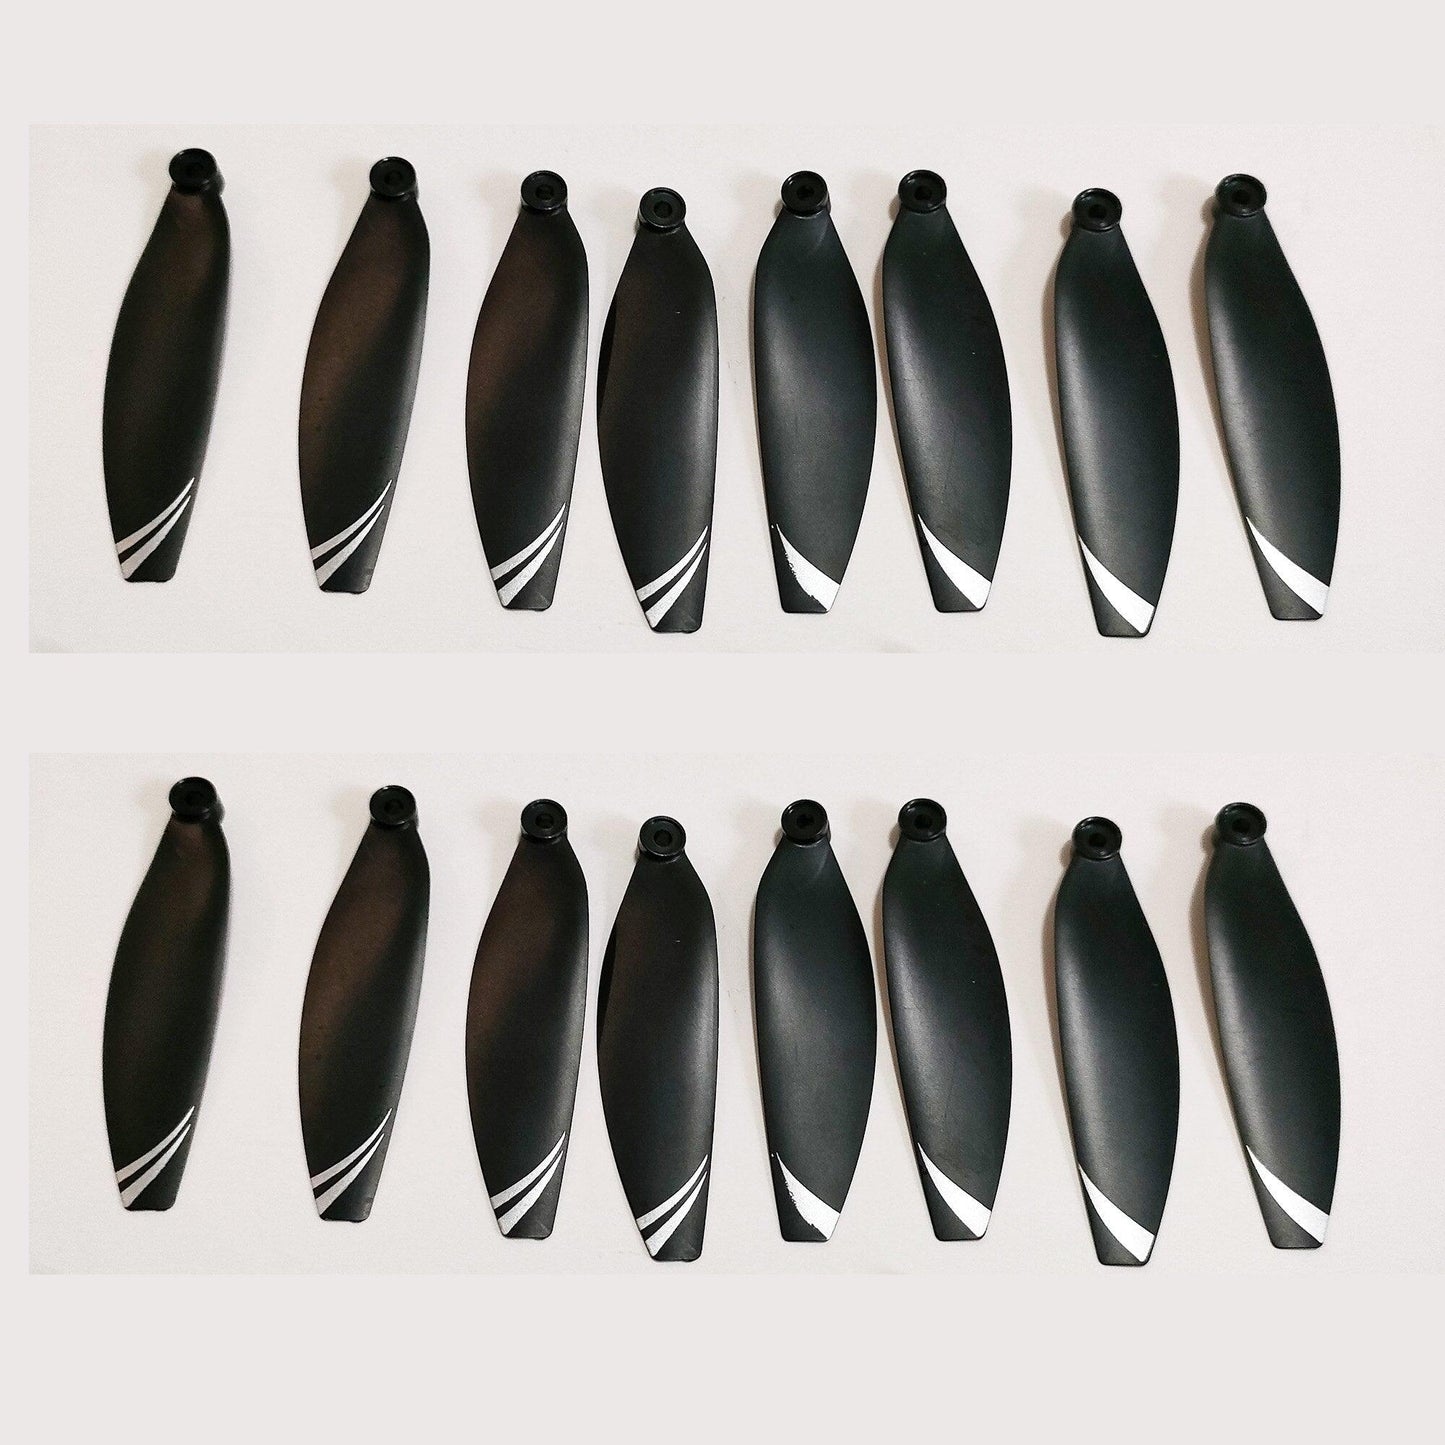 JJRC X16 CW CCW Propeller - Blade Spare Part X16 RC GPS Drone Wifi FPV Quadcopter Helicopter Original Rotor Fan Accessory - RCDrone